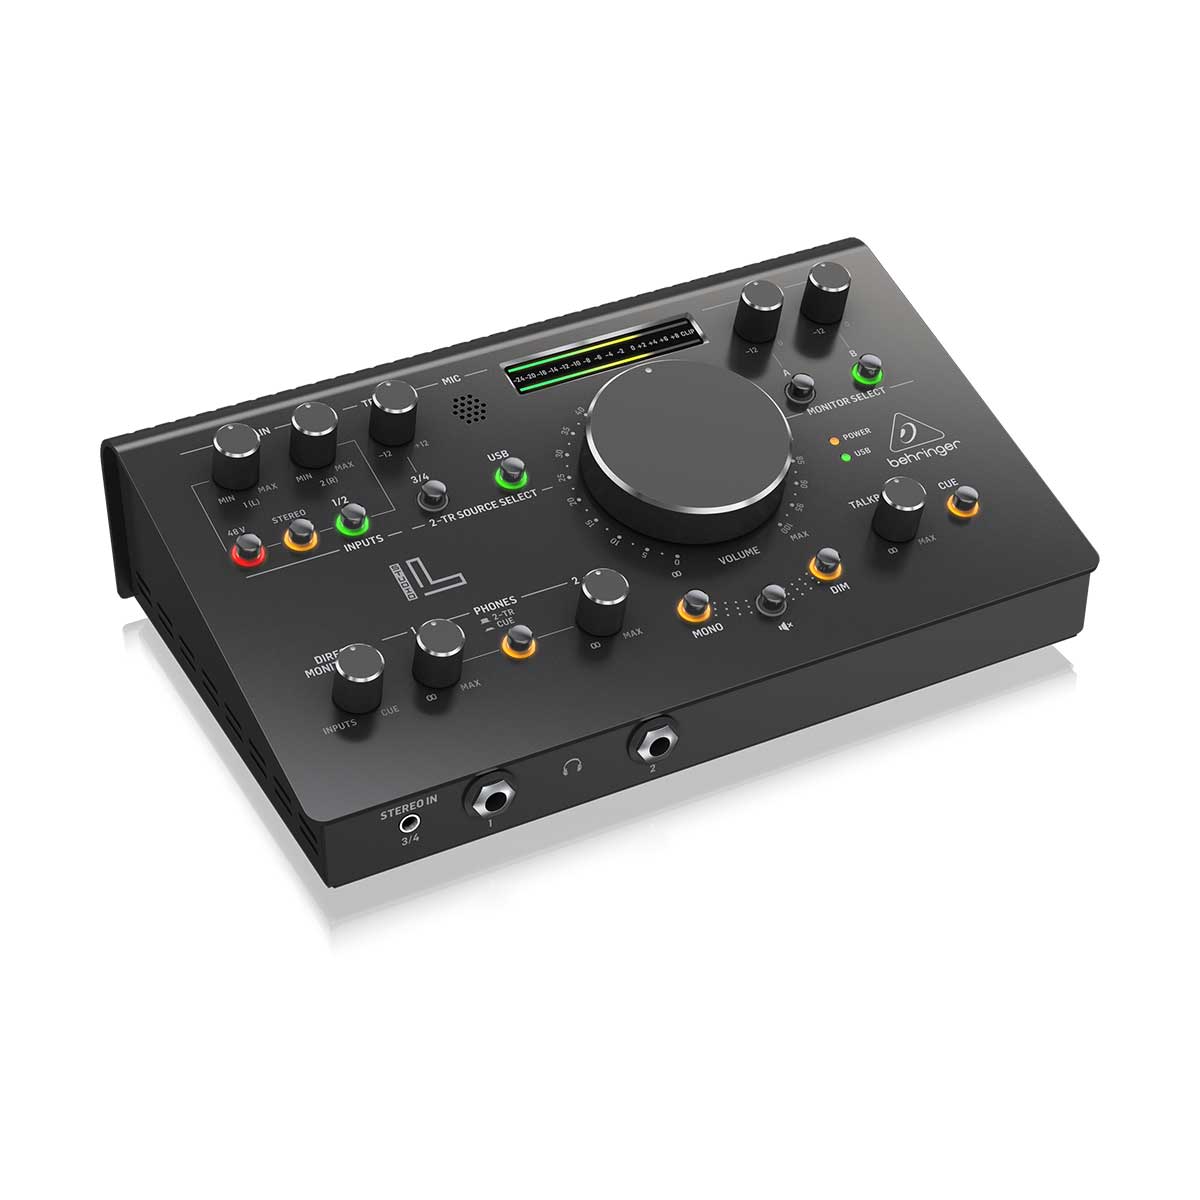 Behringer Studio L Monitor Controller and USB Audio Interface